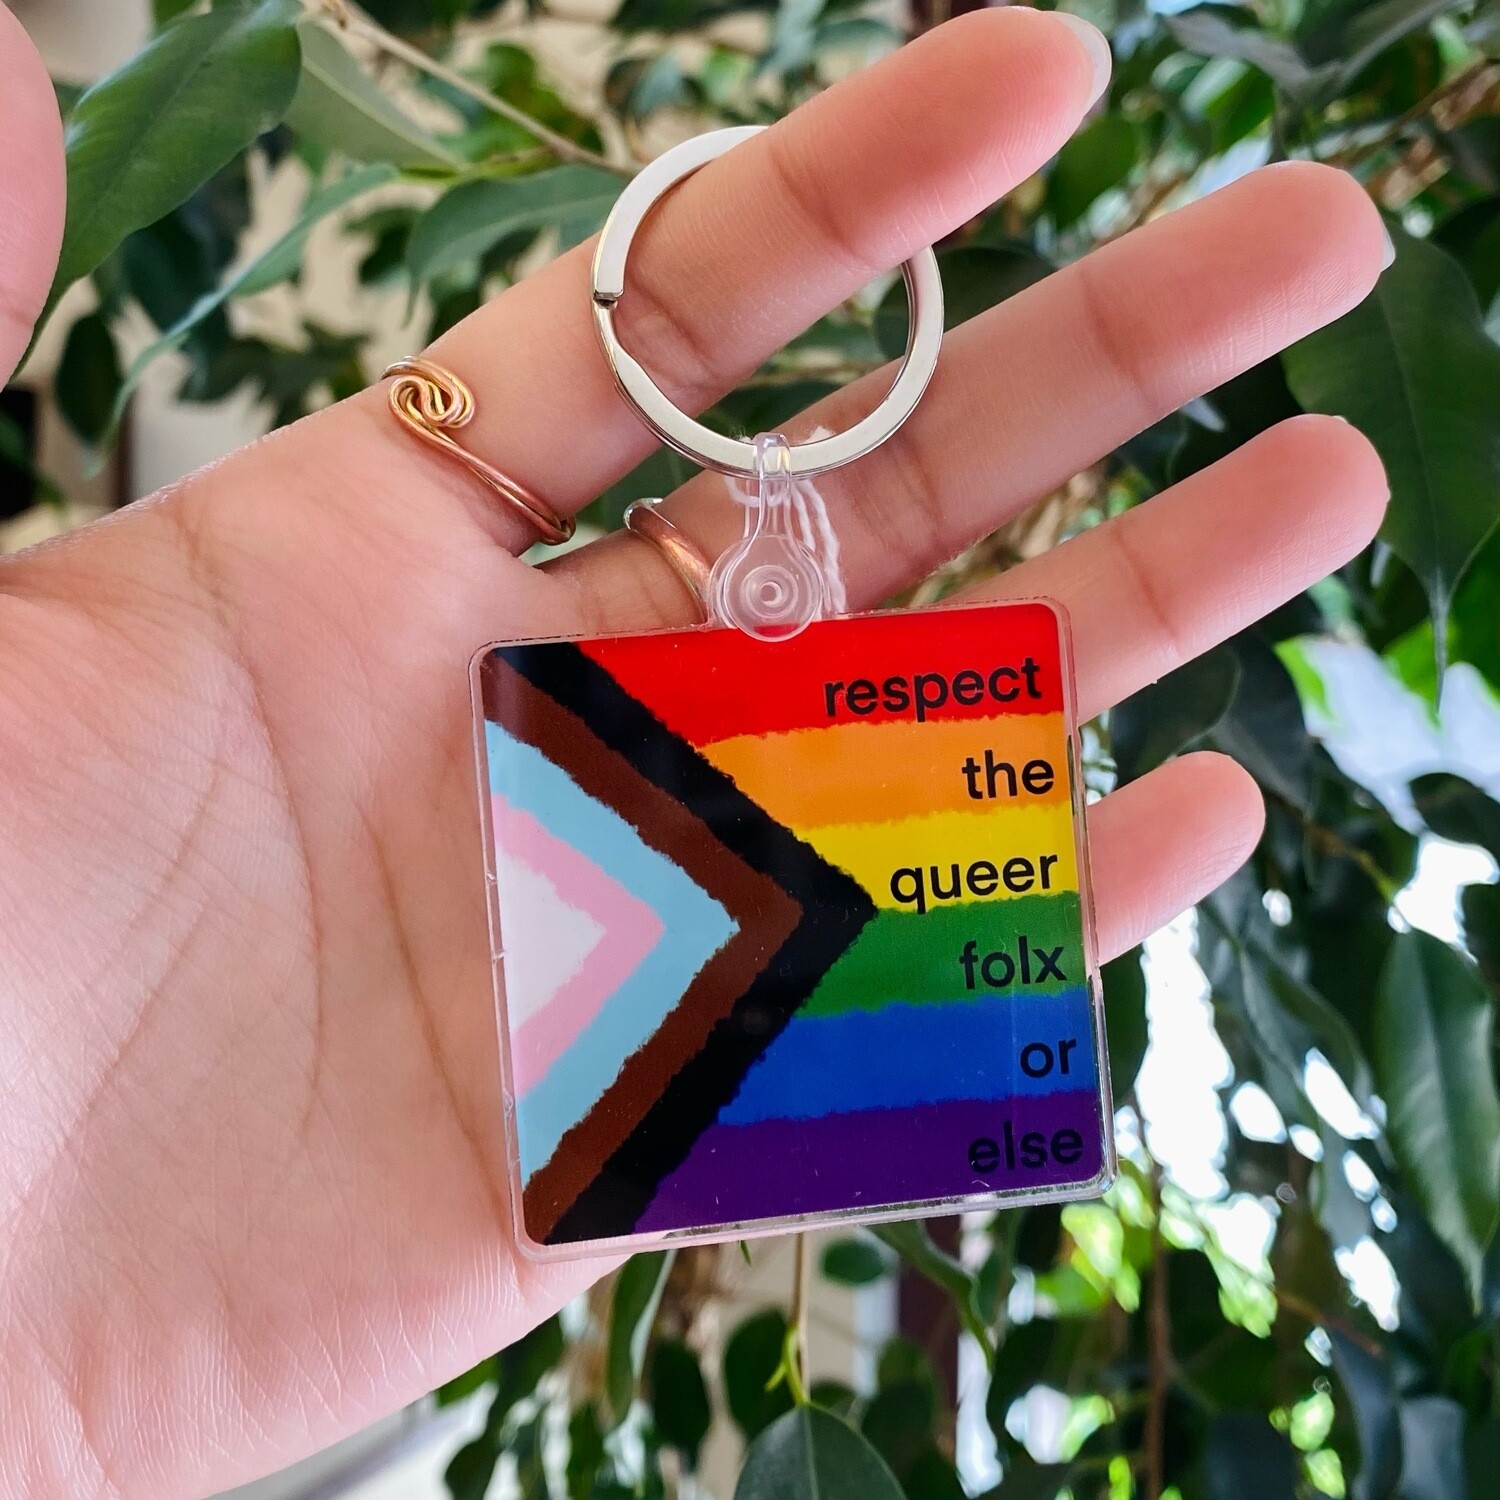 Key Chain, Respect the Queer Folx or Else